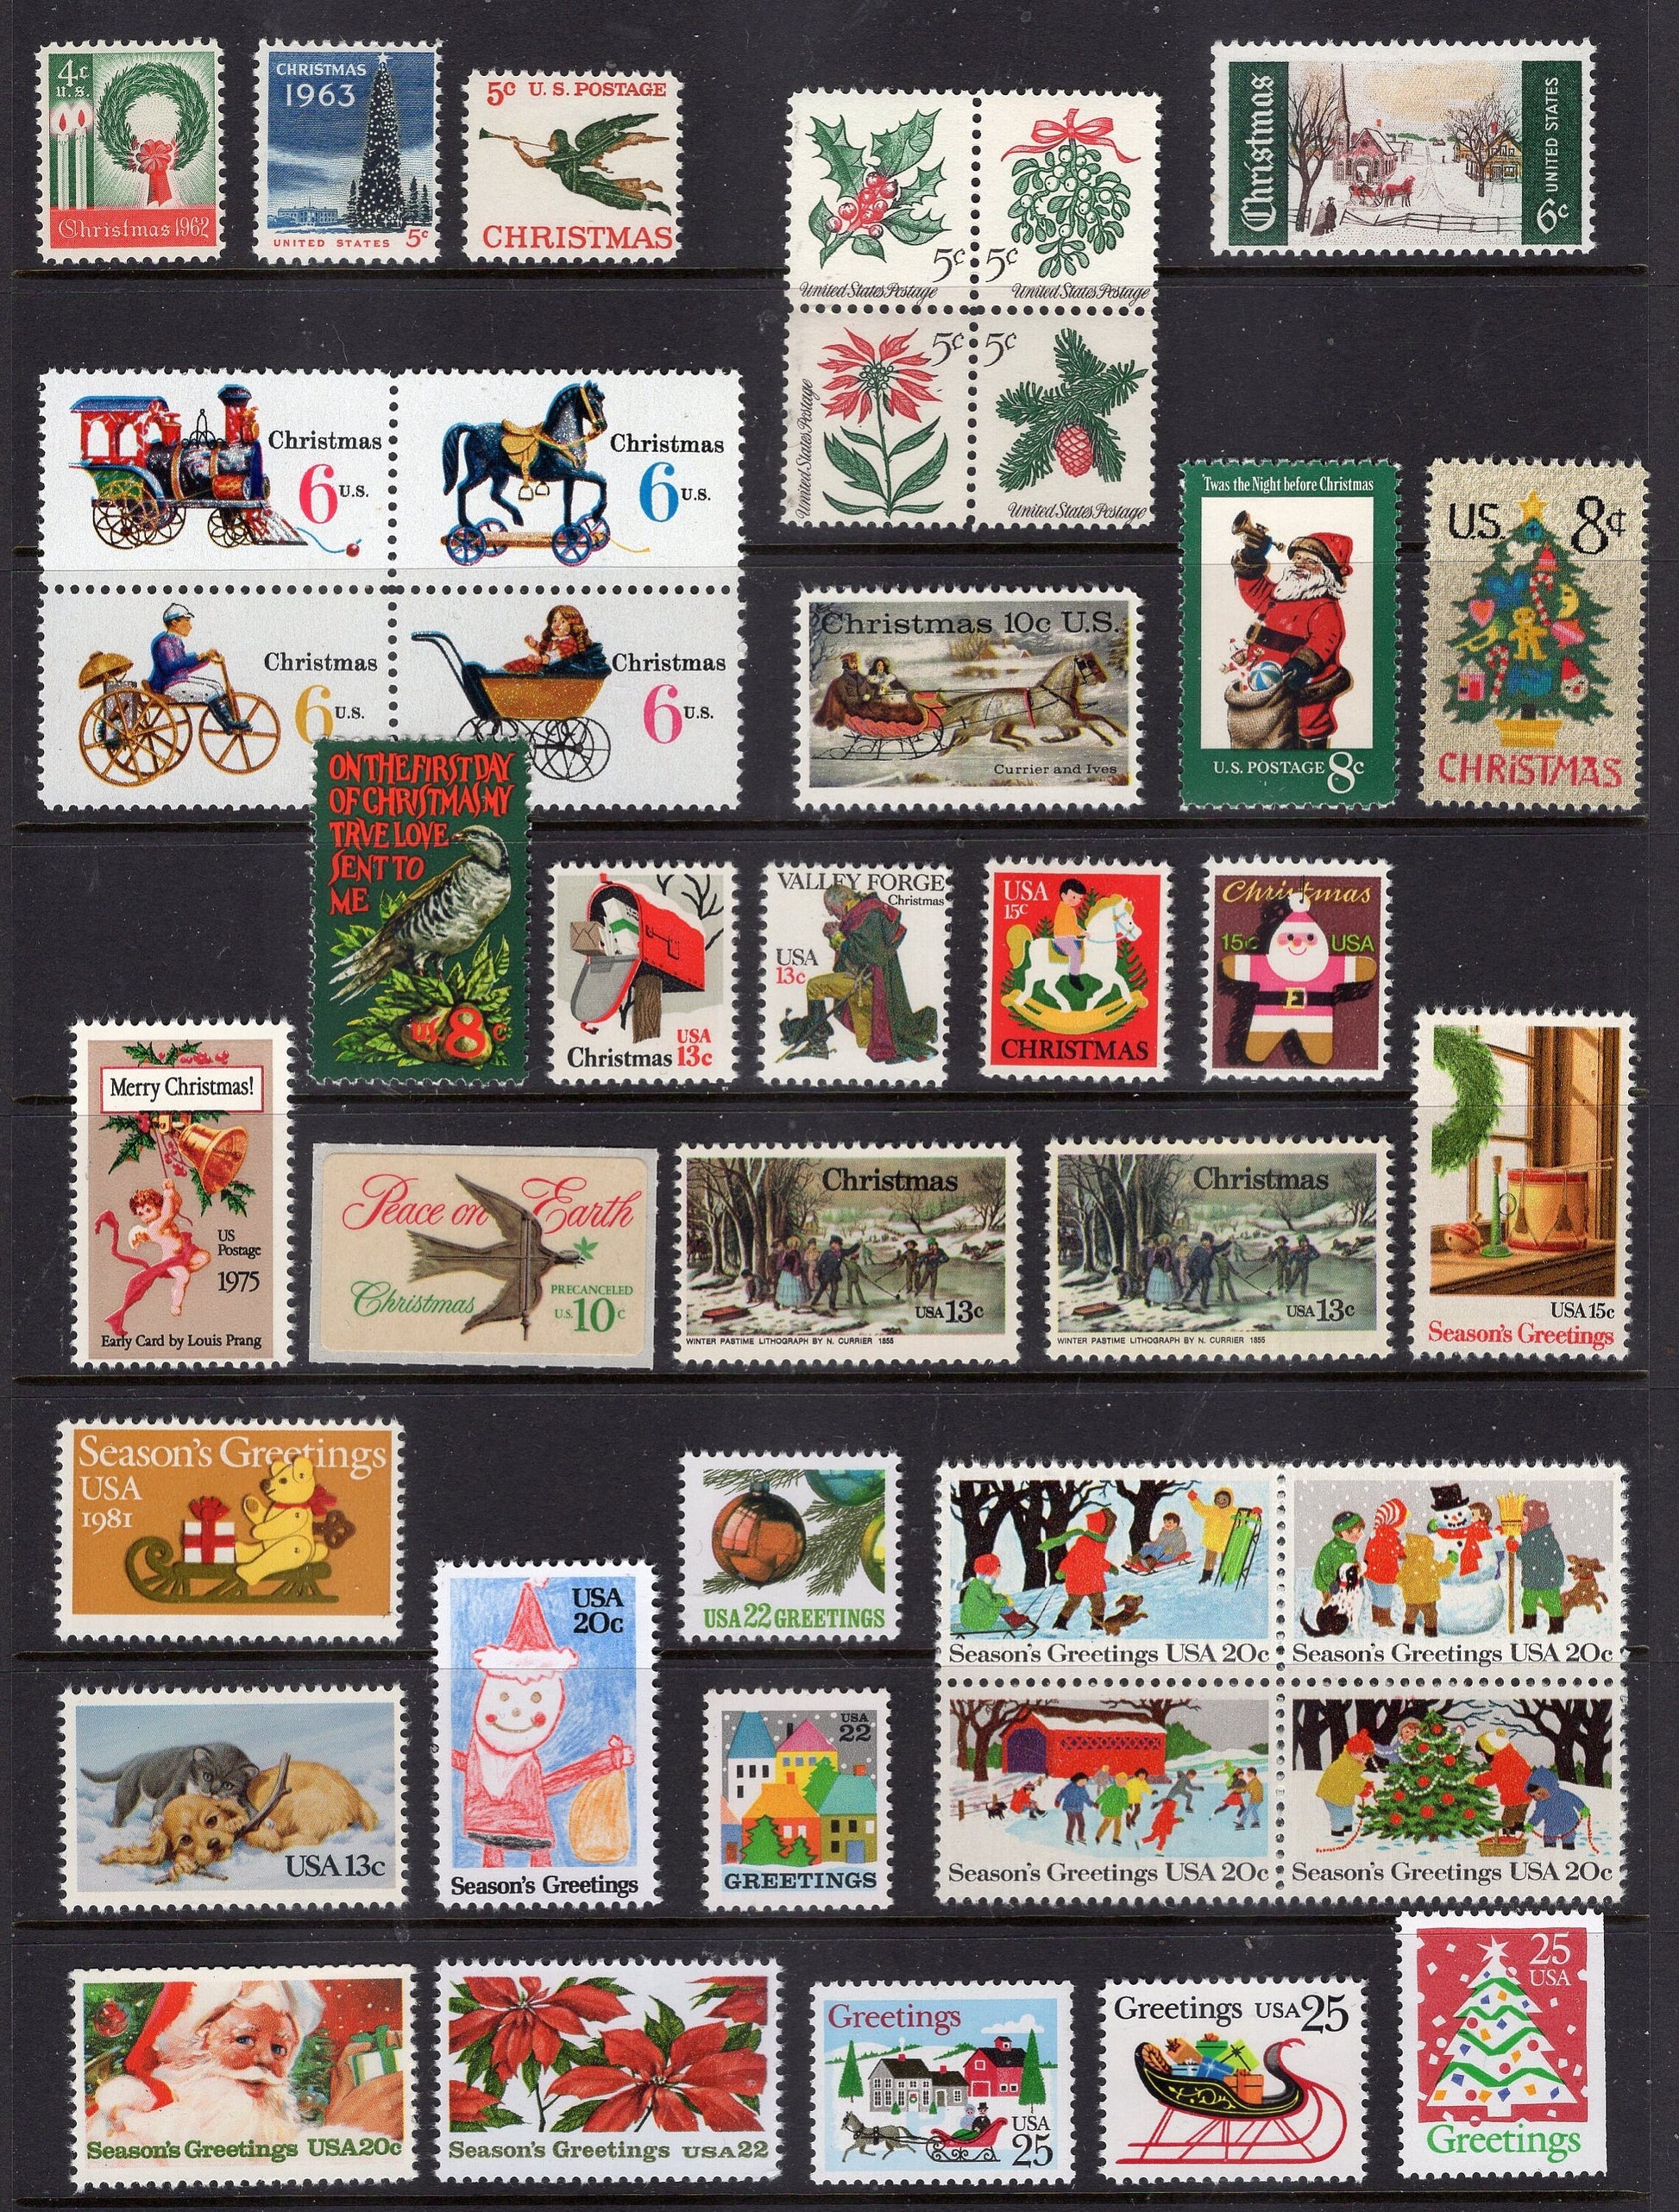 SPECTACULAR CHRISTMAS COLLECTION #2 of 128 Mint Bright USA Stamps - 3 Scans - Rarely Seen - Great Gift - Issued in 1962/2008 -